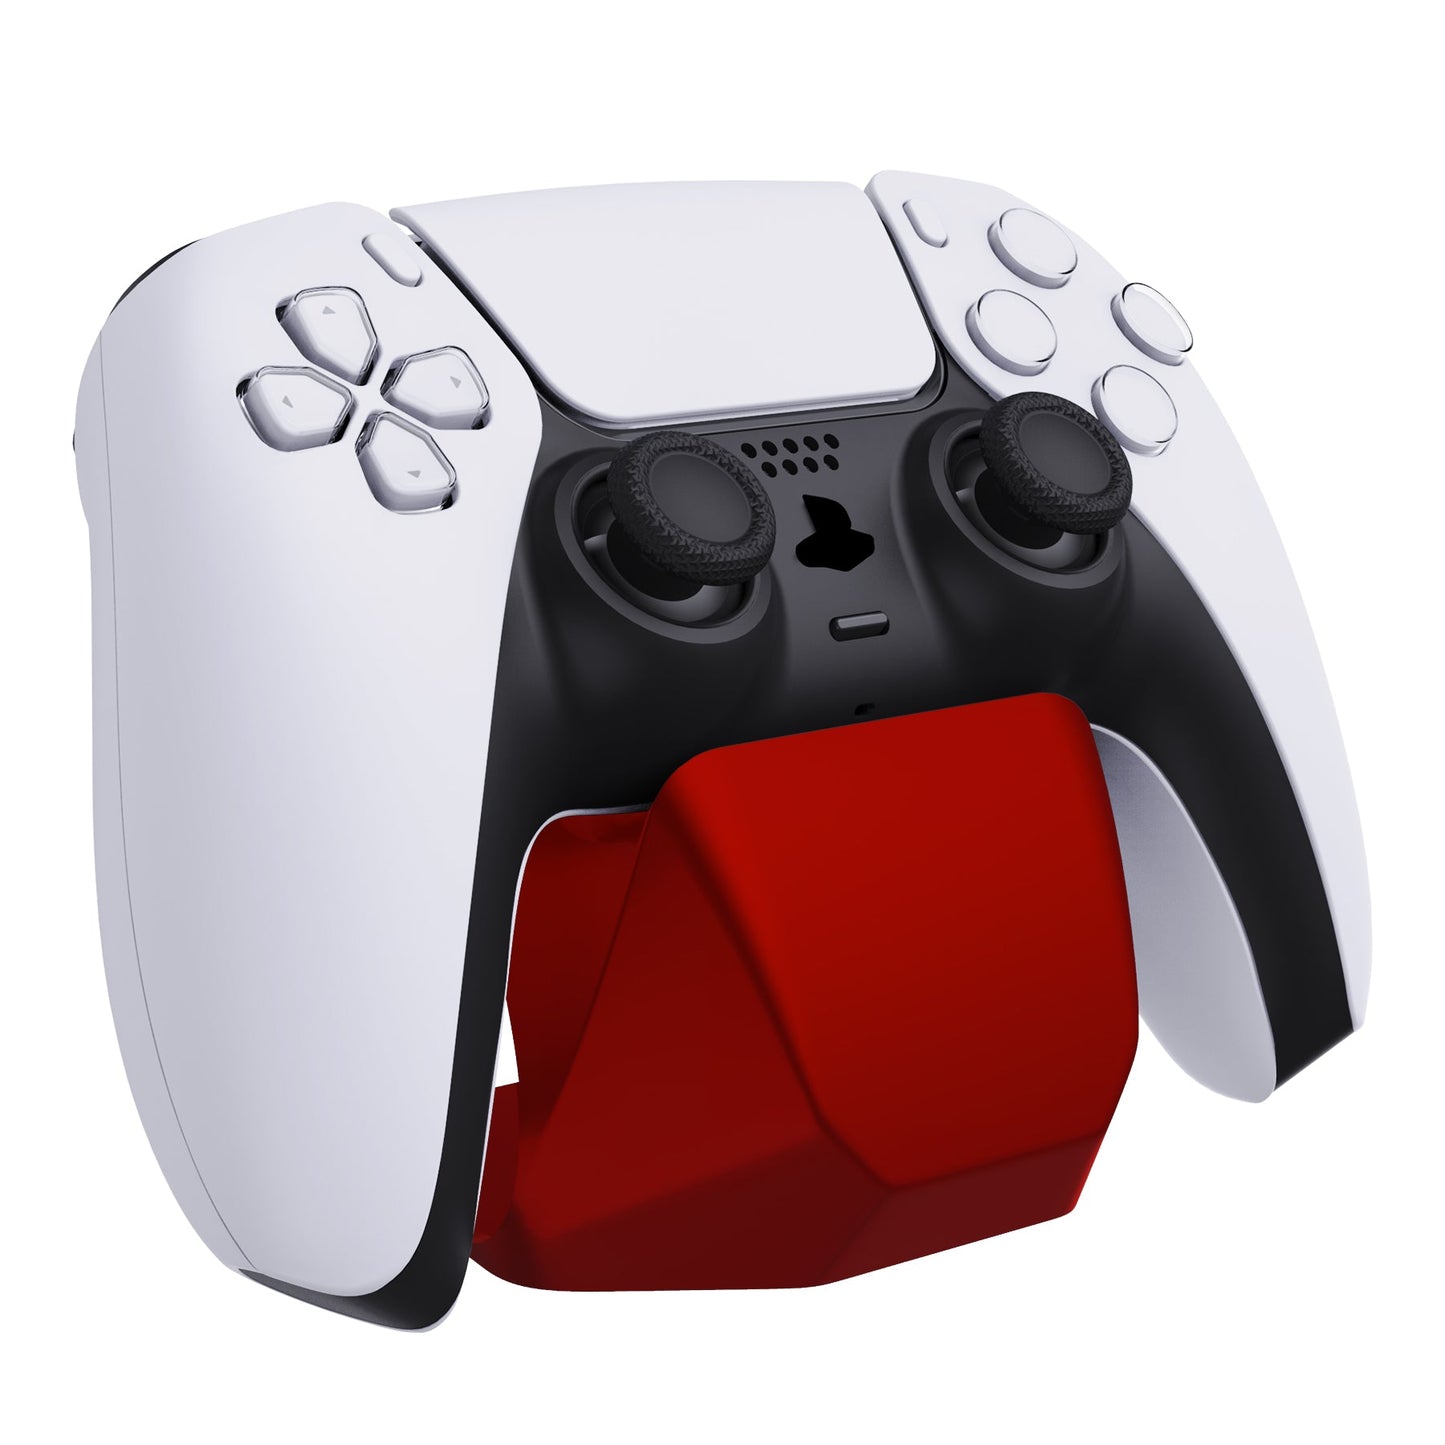 PlayVital Scarlet Red Universal Game Controller Stand for Xbox Series X/S Controller, Gamepad Stand for PS5/4 Controller, Display Stand Holder for Xbox Controller - PFPJ057 PlayVital